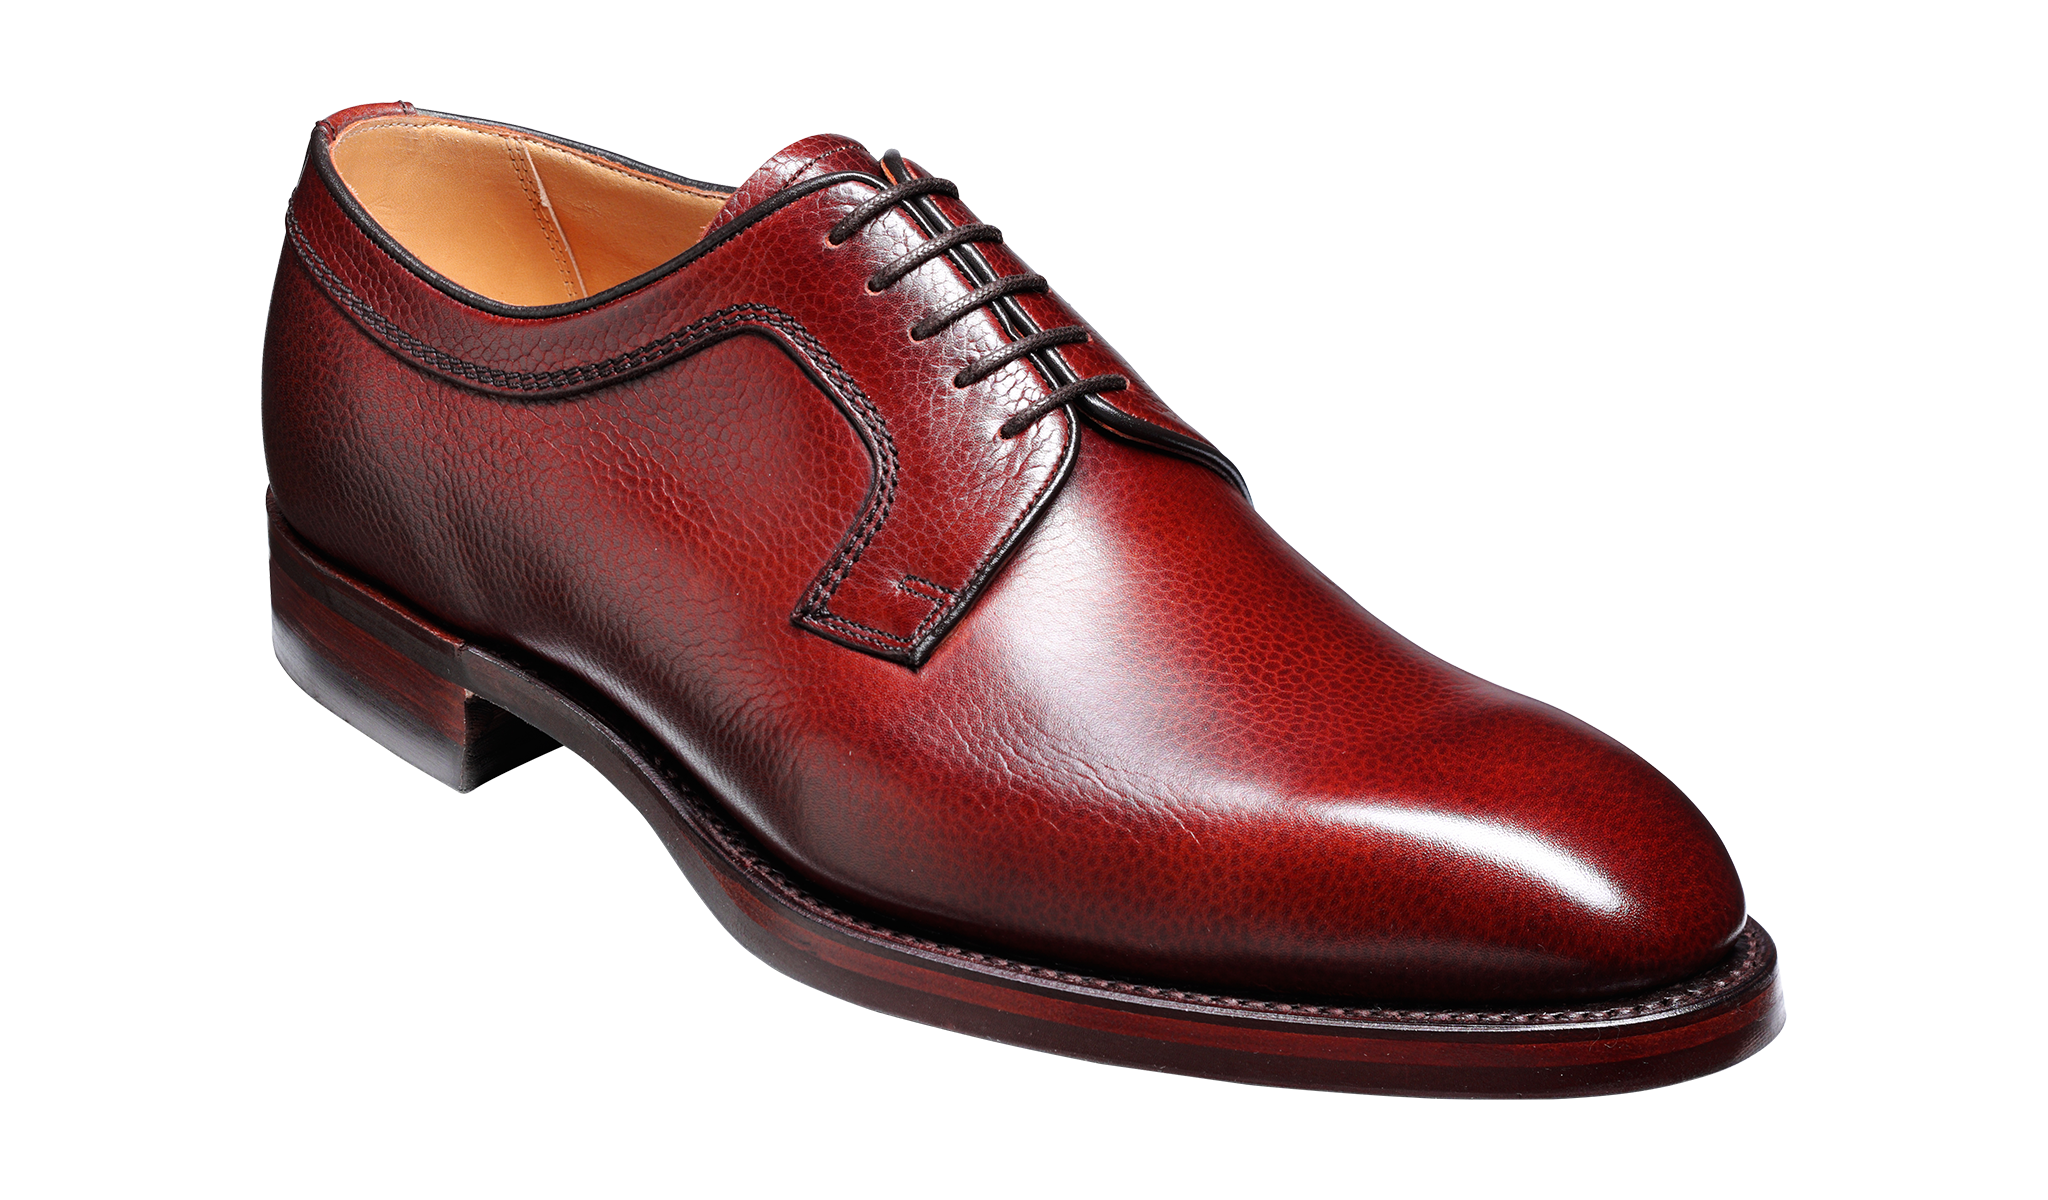 Skye - A brown derby shoes for men